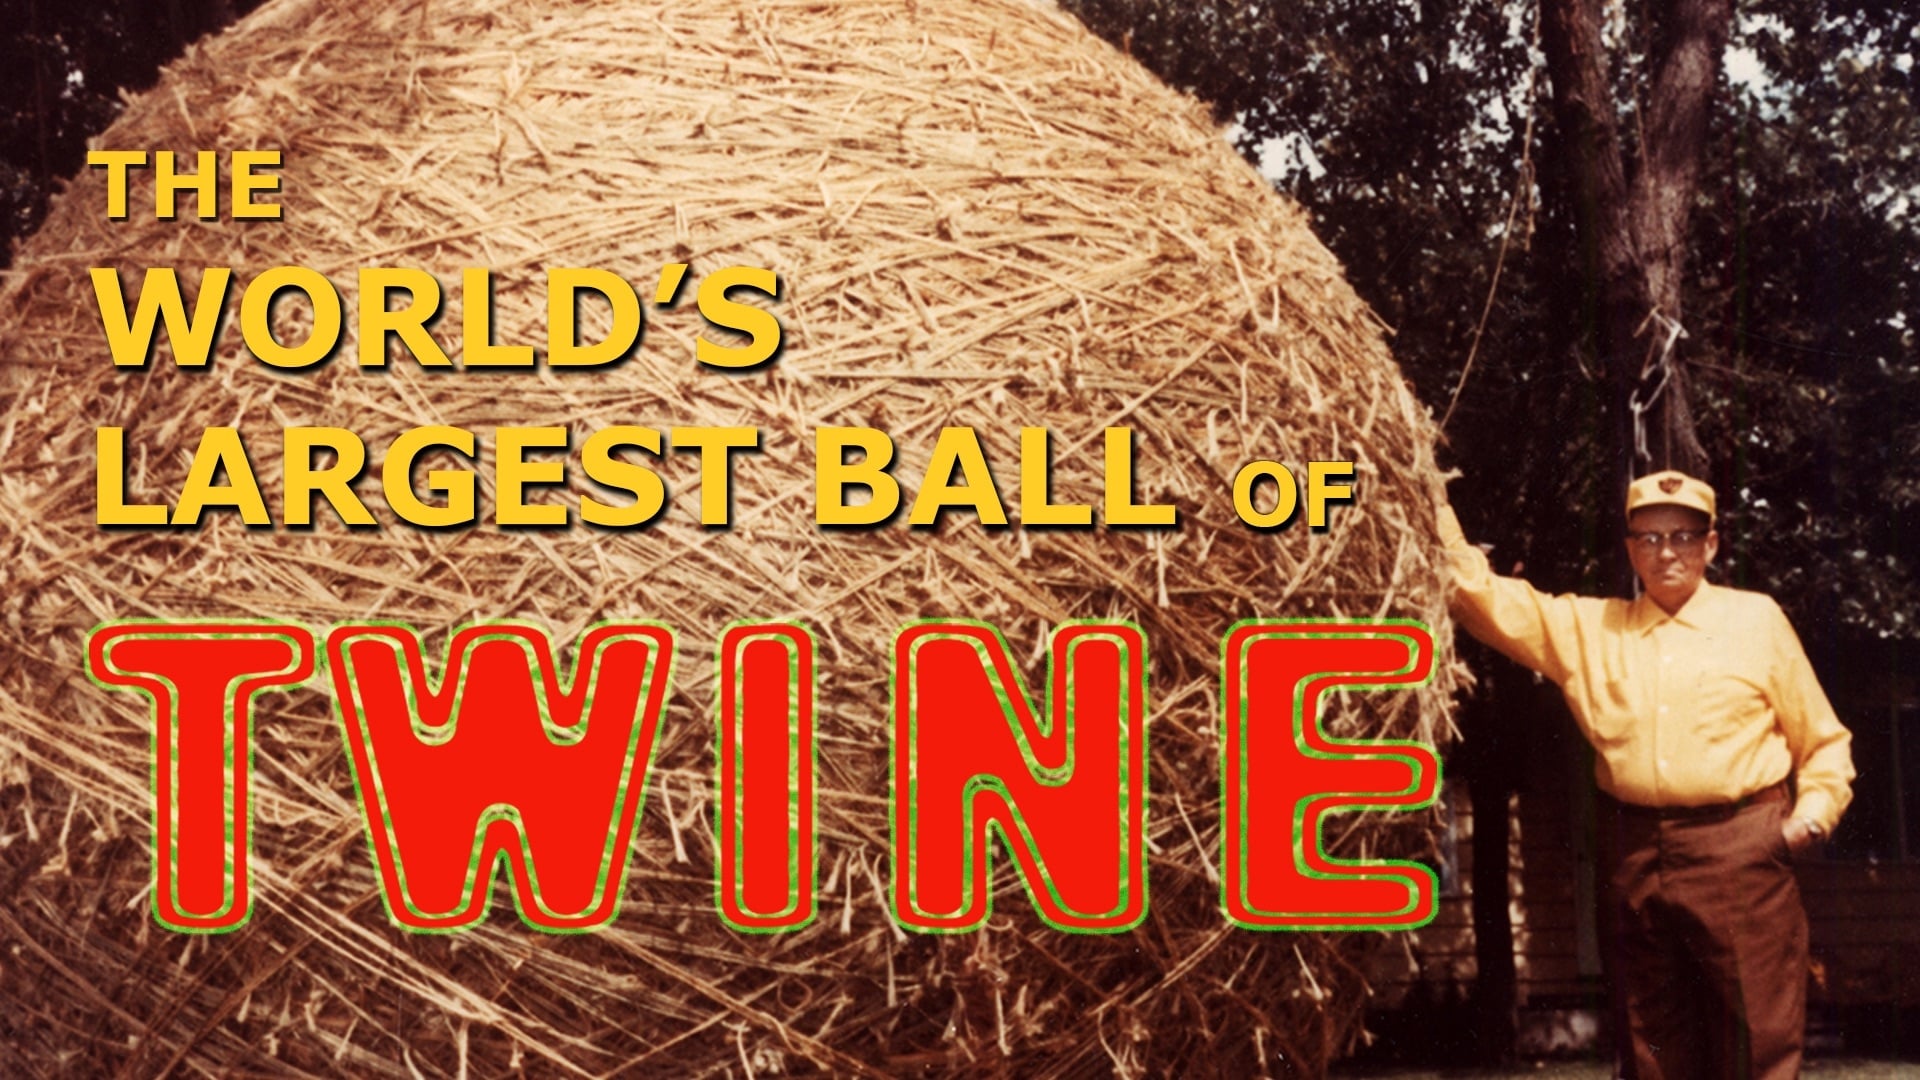 The World's largest Ball of Twine. (2017)